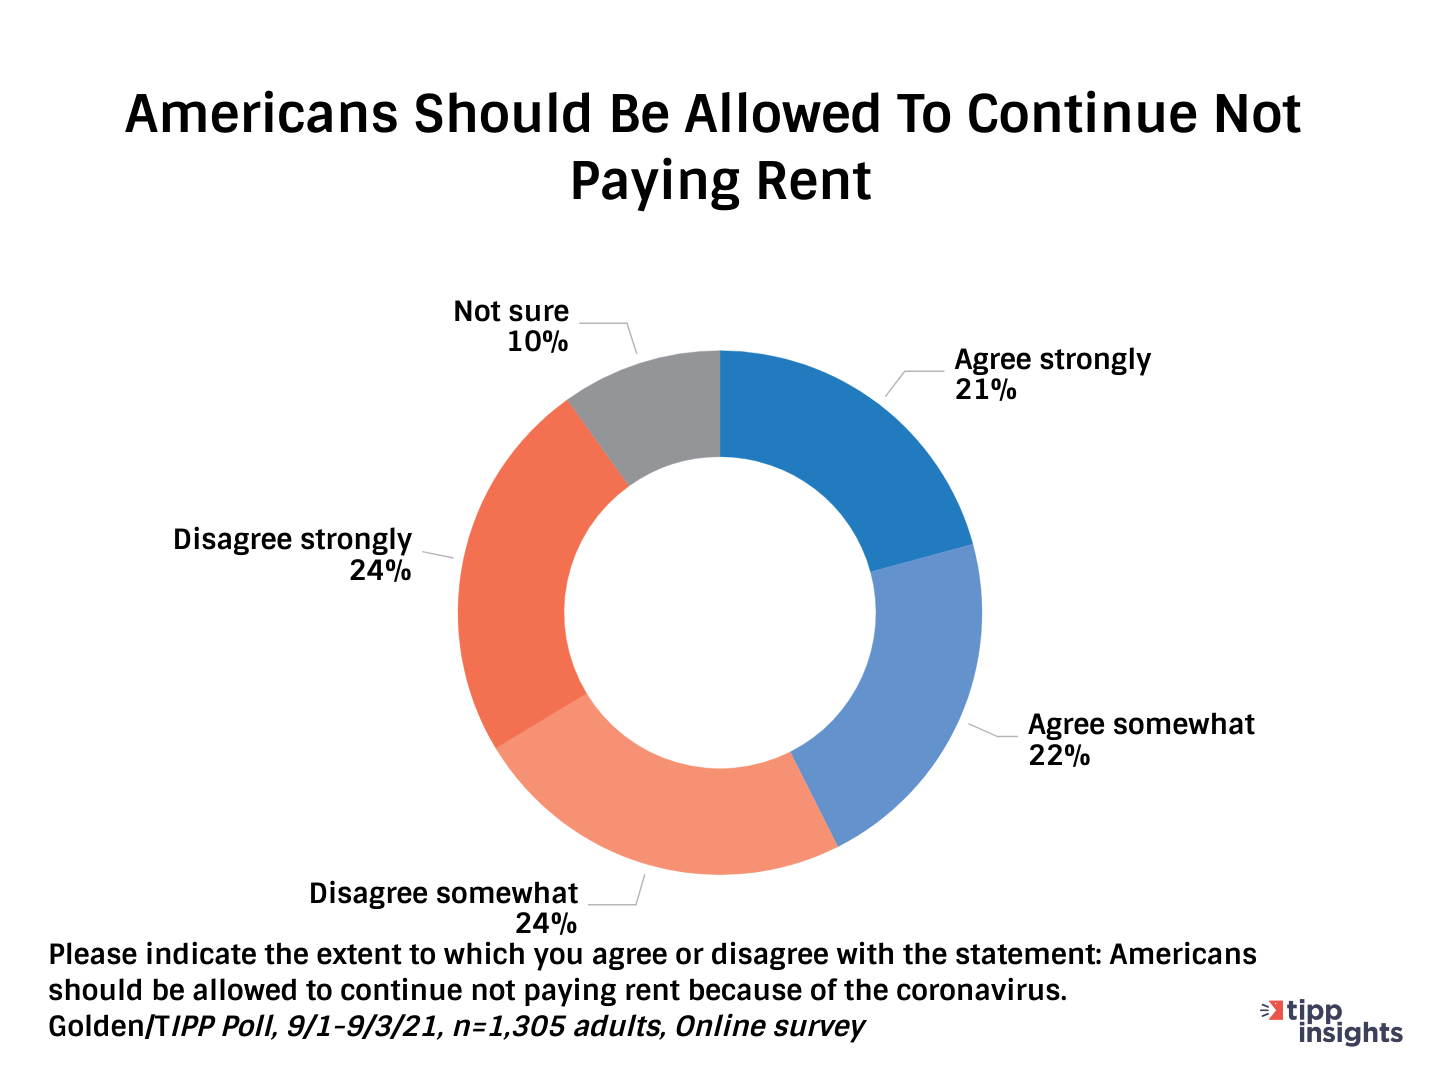 TIPP/Golden Poll Results: Should Americans be allowed to continue not paying rent?